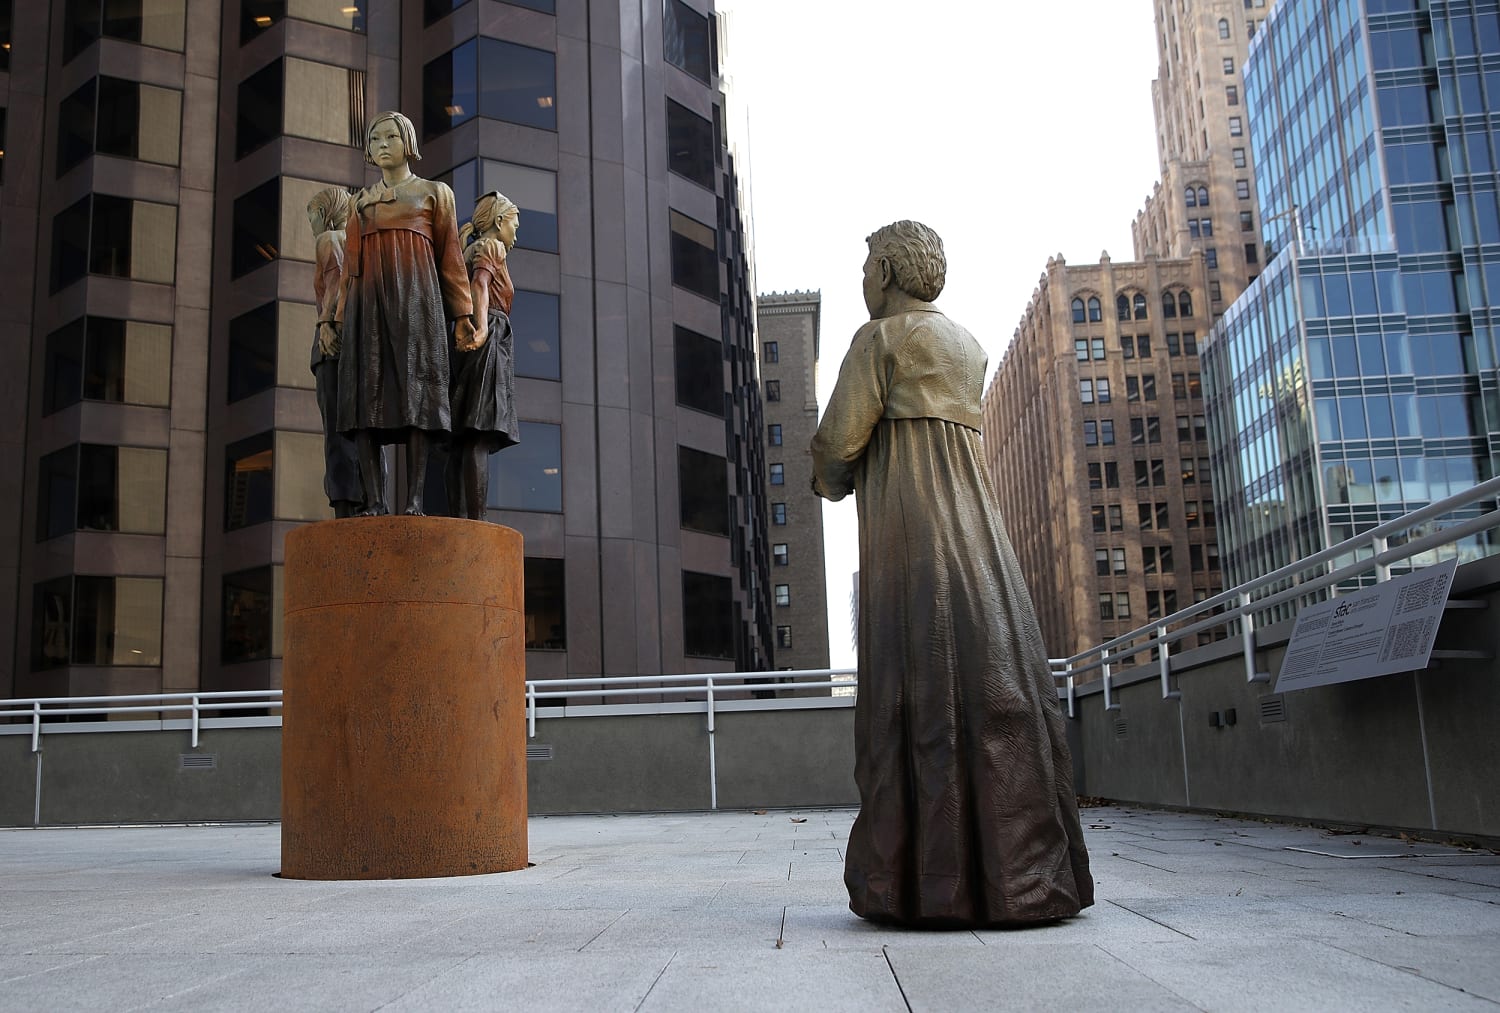 Who are the comfort women, and why are U.S.-based memorials for them controversial? photo